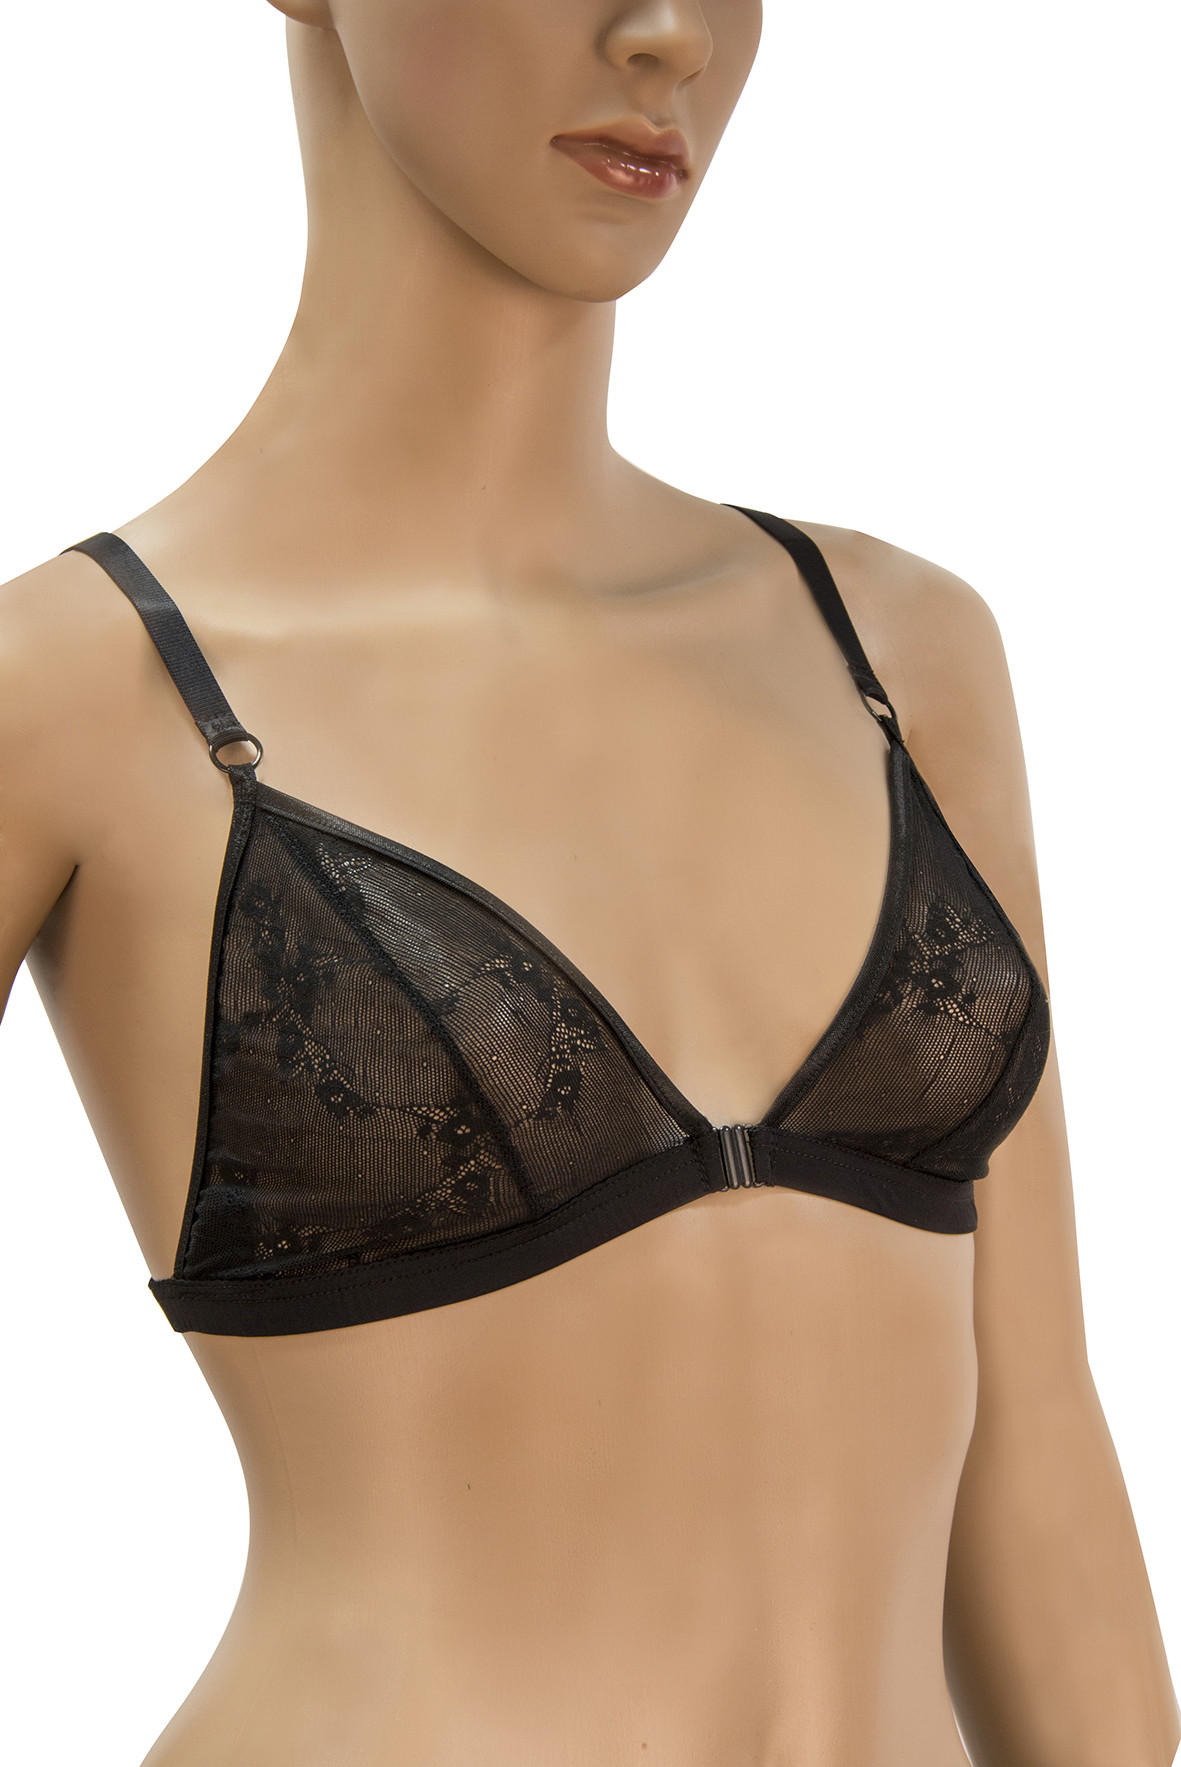 Fascinating triangle bra without straps/cup